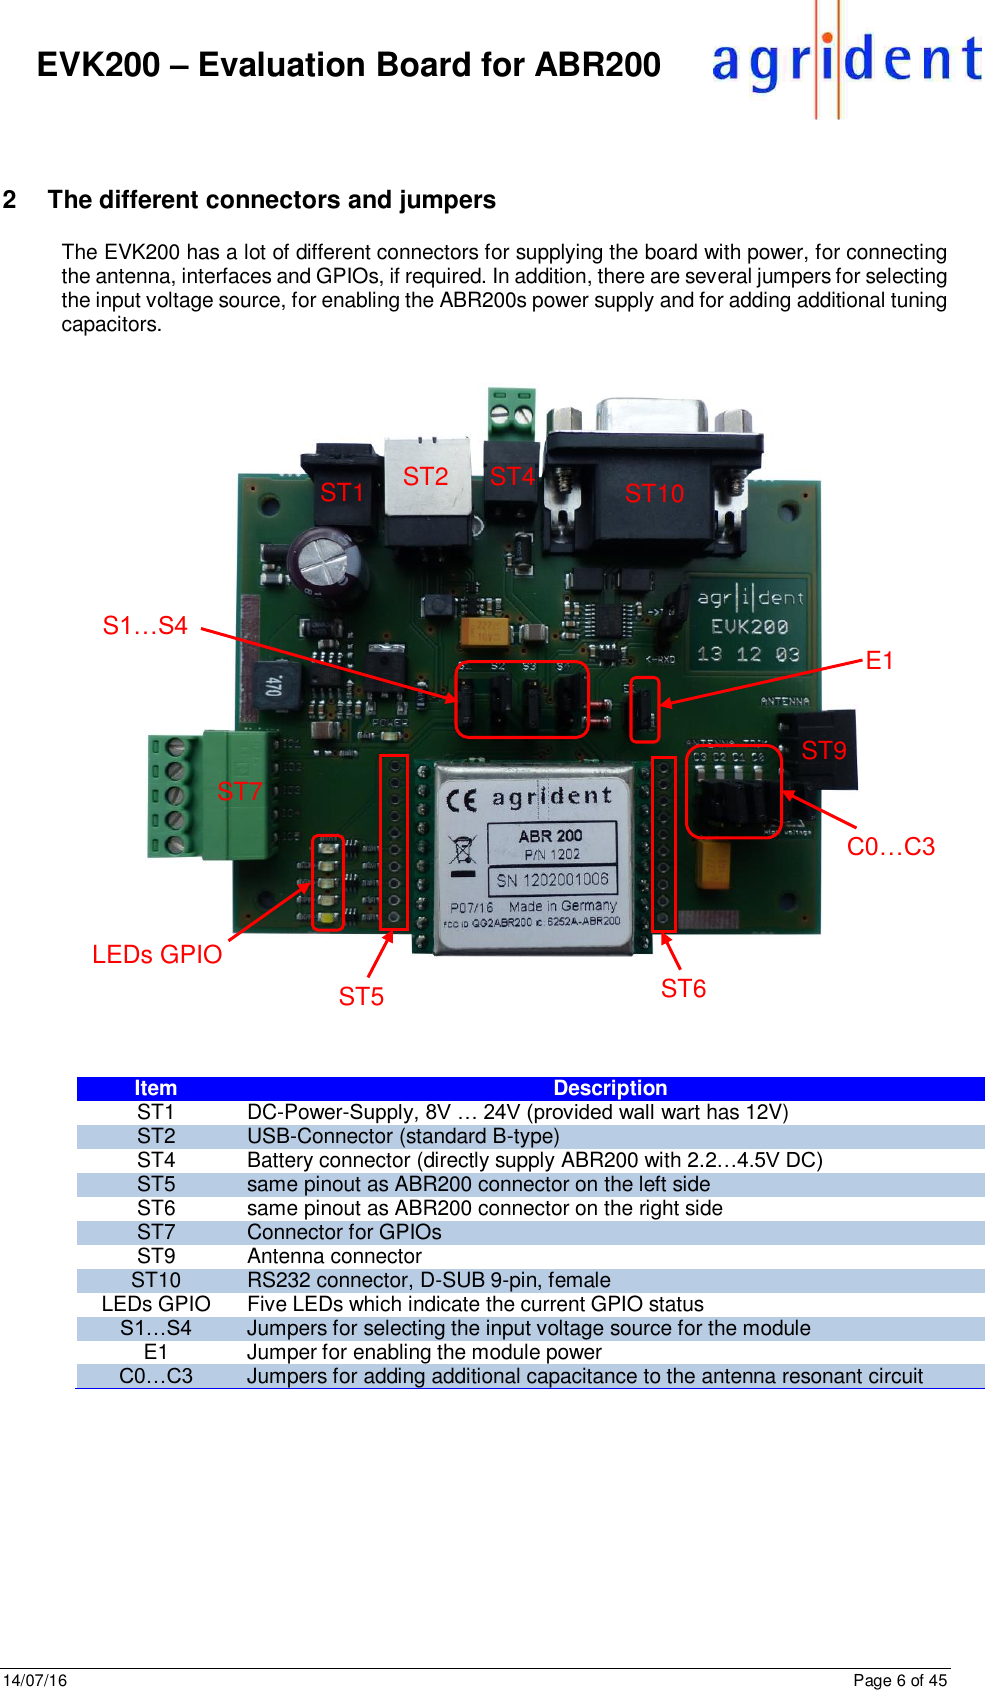 14/07/16      Page 6 of 45      EVK200 – Evaluation Board for ABR200  2  The different connectors and jumpers The EVK200 has a lot of different connectors for supplying the board with power, for connecting the antenna, interfaces and GPIOs, if required. In addition, there are several jumpers for selecting the input voltage source, for enabling the ABR200s power supply and for adding additional tuning capacitors.          Item Description ST1 DC-Power-Supply, 8V … 24V (provided wall wart has 12V) ST2 USB-Connector (standard B-type) ST4 Battery connector (directly supply ABR200 with 2.2…4.5V DC) ST5 same pinout as ABR200 connector on the left side ST6 same pinout as ABR200 connector on the right side ST7 Connector for GPIOs ST9 Antenna connector ST10 RS232 connector, D-SUB 9-pin, female LEDs GPIO Five LEDs which indicate the current GPIO status S1…S4 Jumpers for selecting the input voltage source for the module E1 Jumper for enabling the module power C0…C3 Jumpers for adding additional capacitance to the antenna resonant circuit     ST1 ST2 ST4 ST10 ST7 ST9 ST5 ST6 S1…S4 E1 C0…C3 LEDs GPIO 